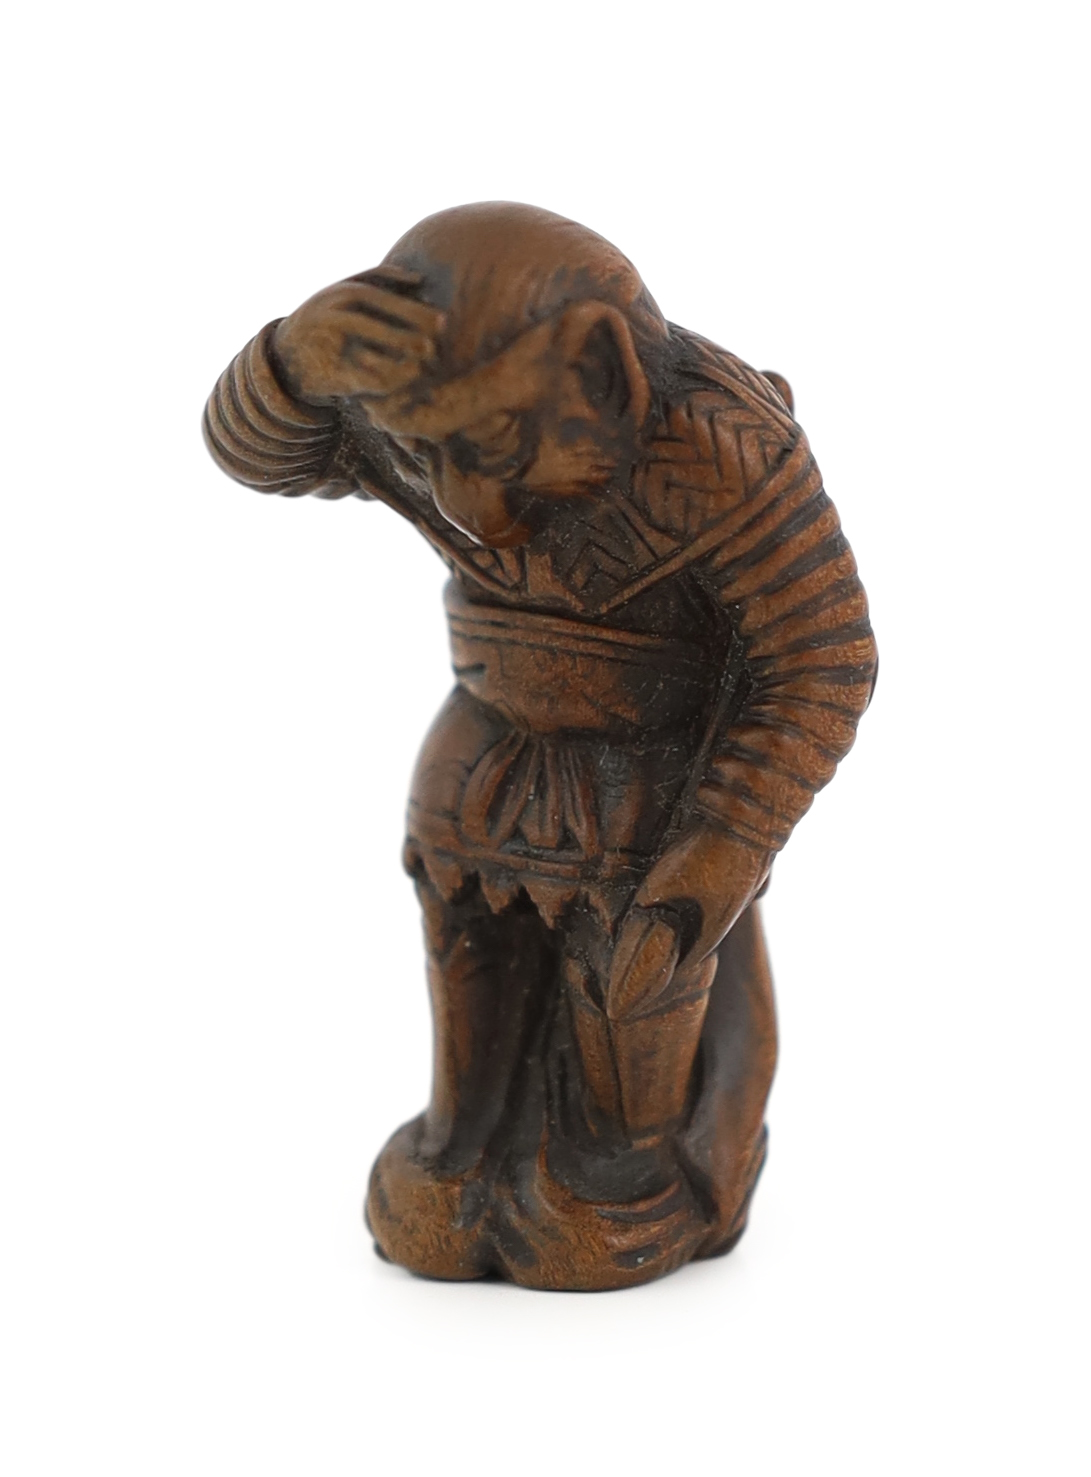 A Japanese wood netsuke of Son Goku (Sun Wukong) flying on his cloud somersault, early 19th century, signed Sentsu                                                                                                          